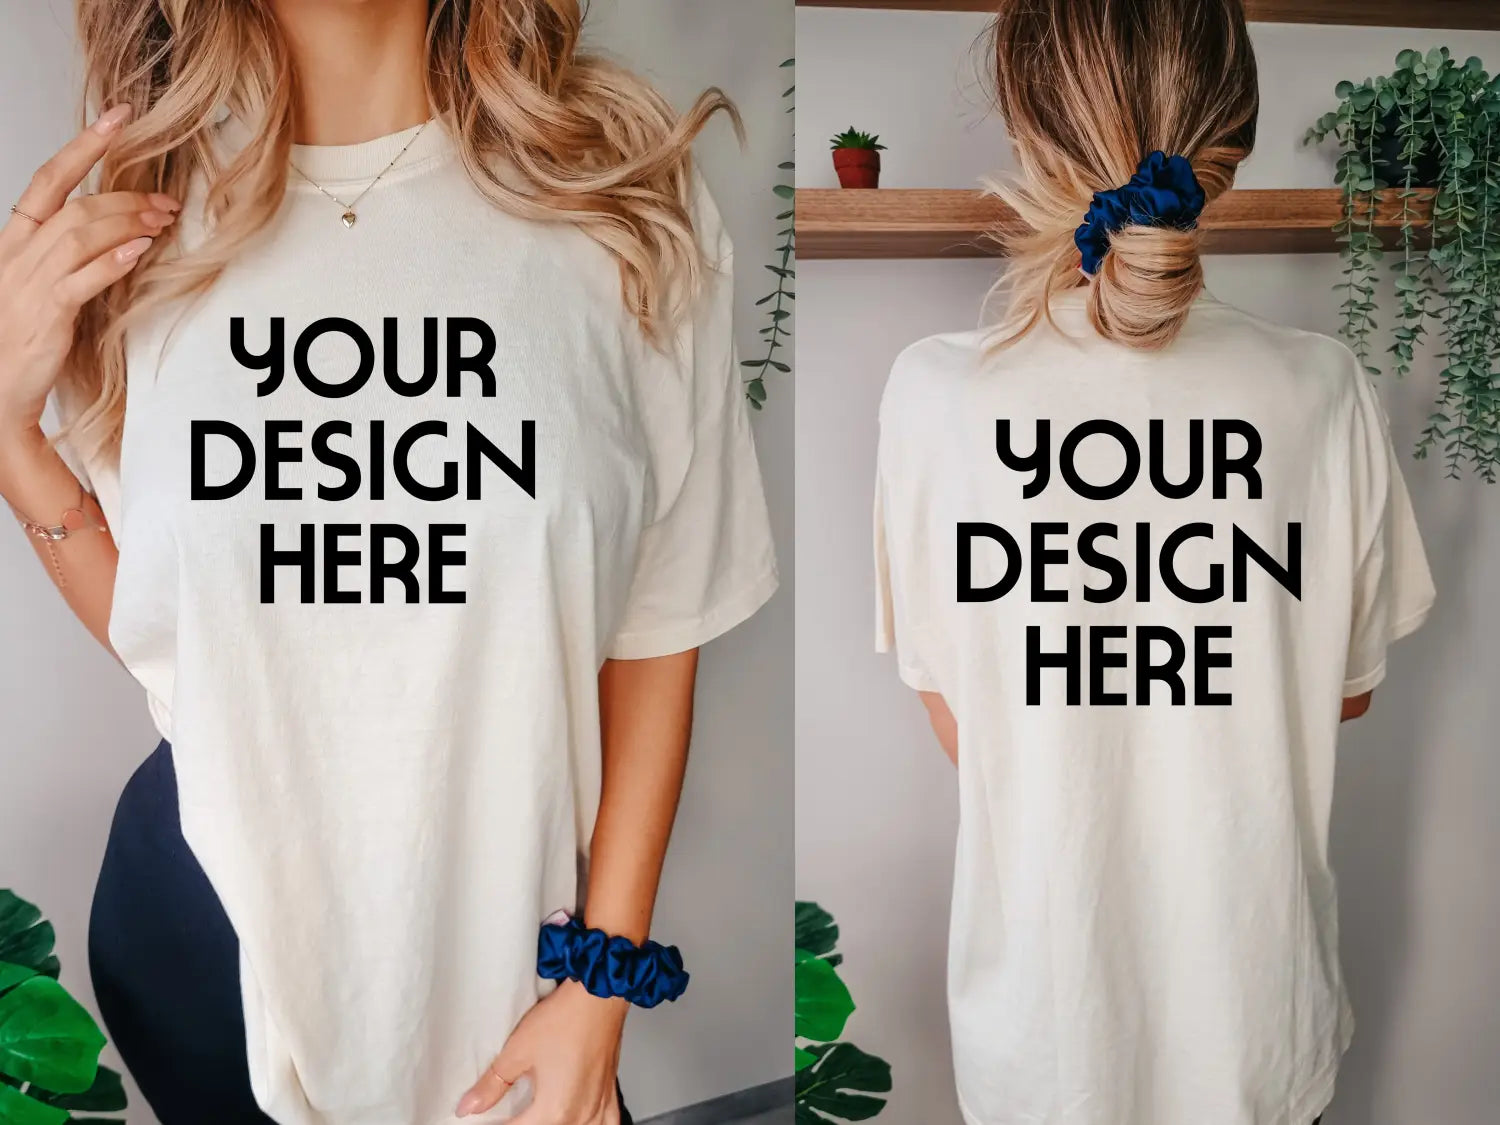 Create your own T-Shirt!